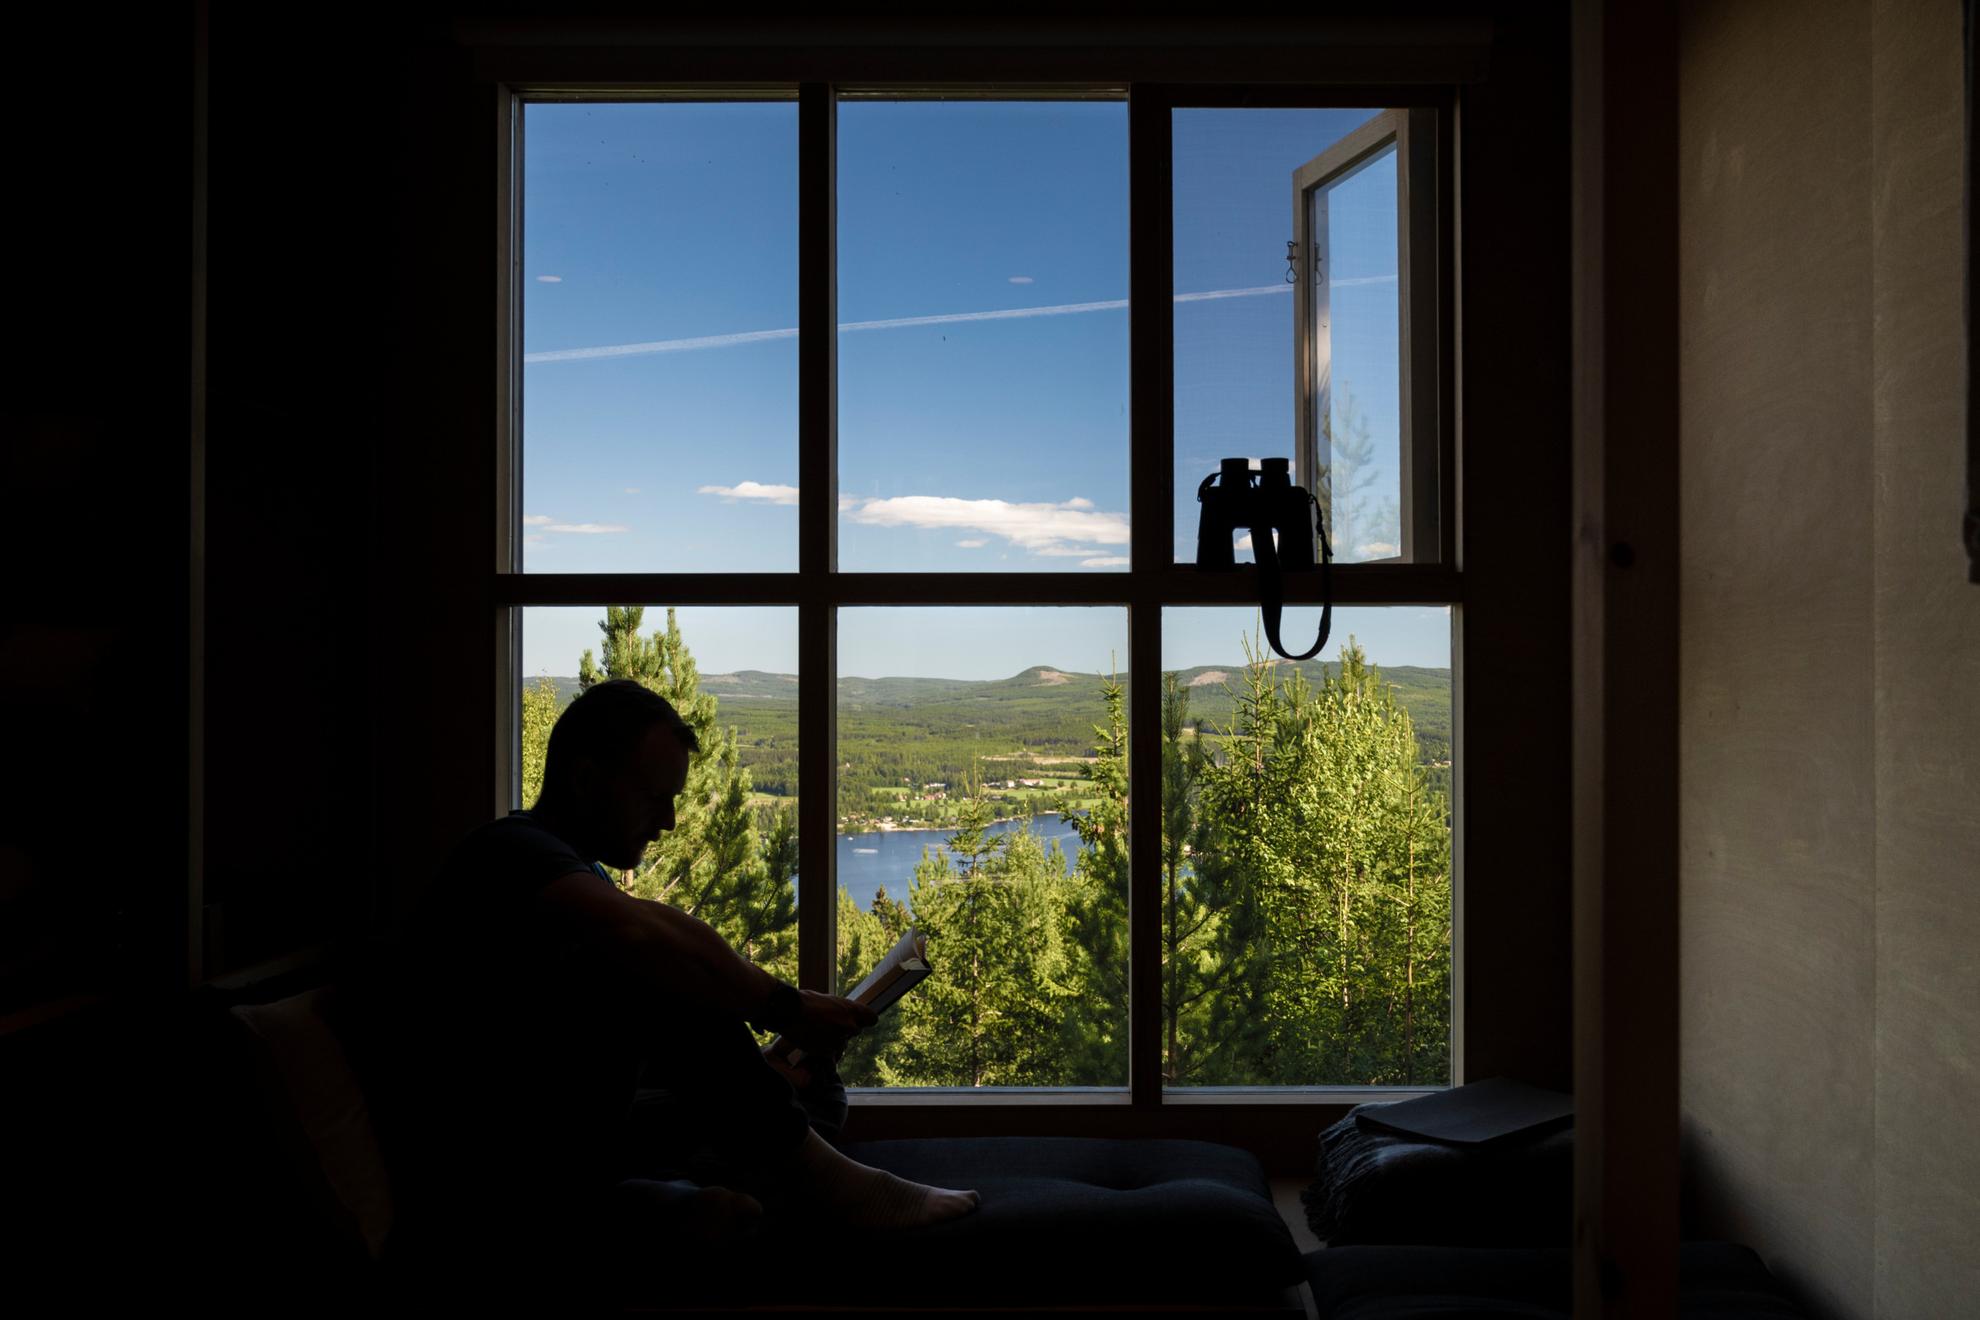 Silhouette of a man reading a book against a large window looking out over the blue sky and the mountains above in Hälsingland, with a pair of binoculars at the ready.